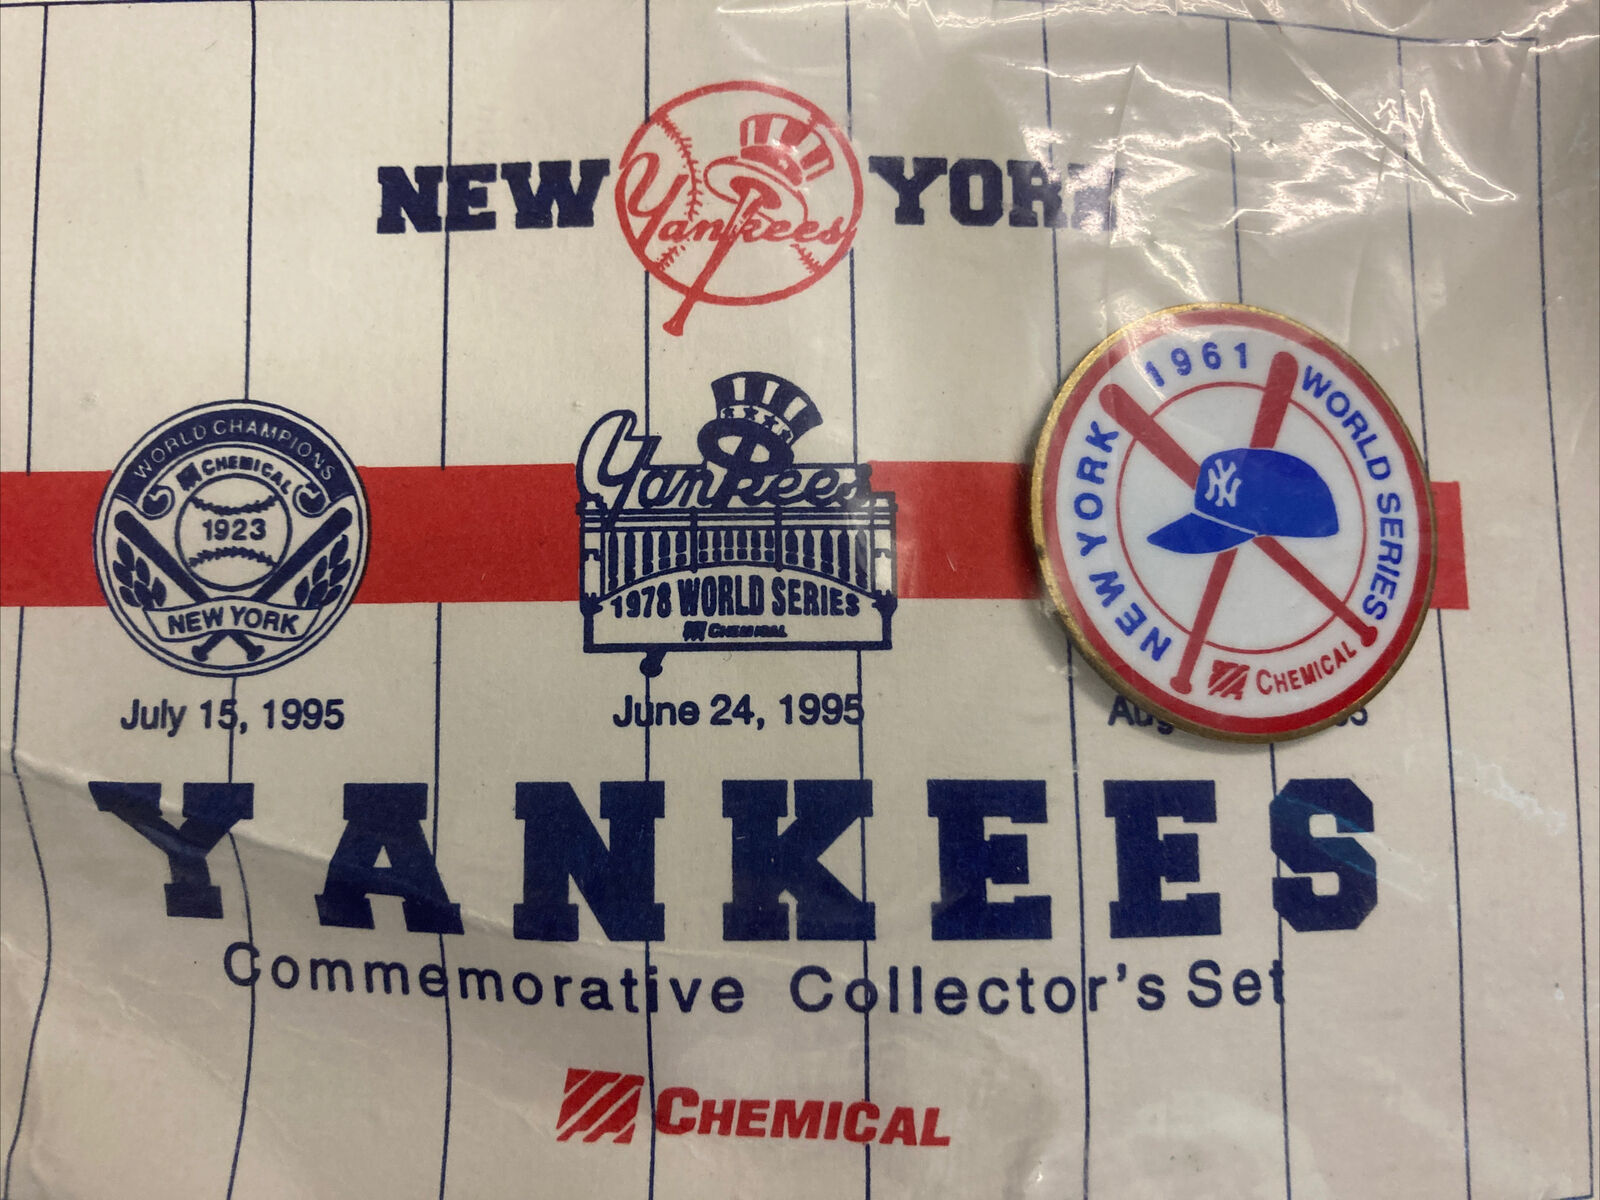 Ny Yankees Commemorative Collector’s Pin 1961 World Series - Chemical Bank 1995